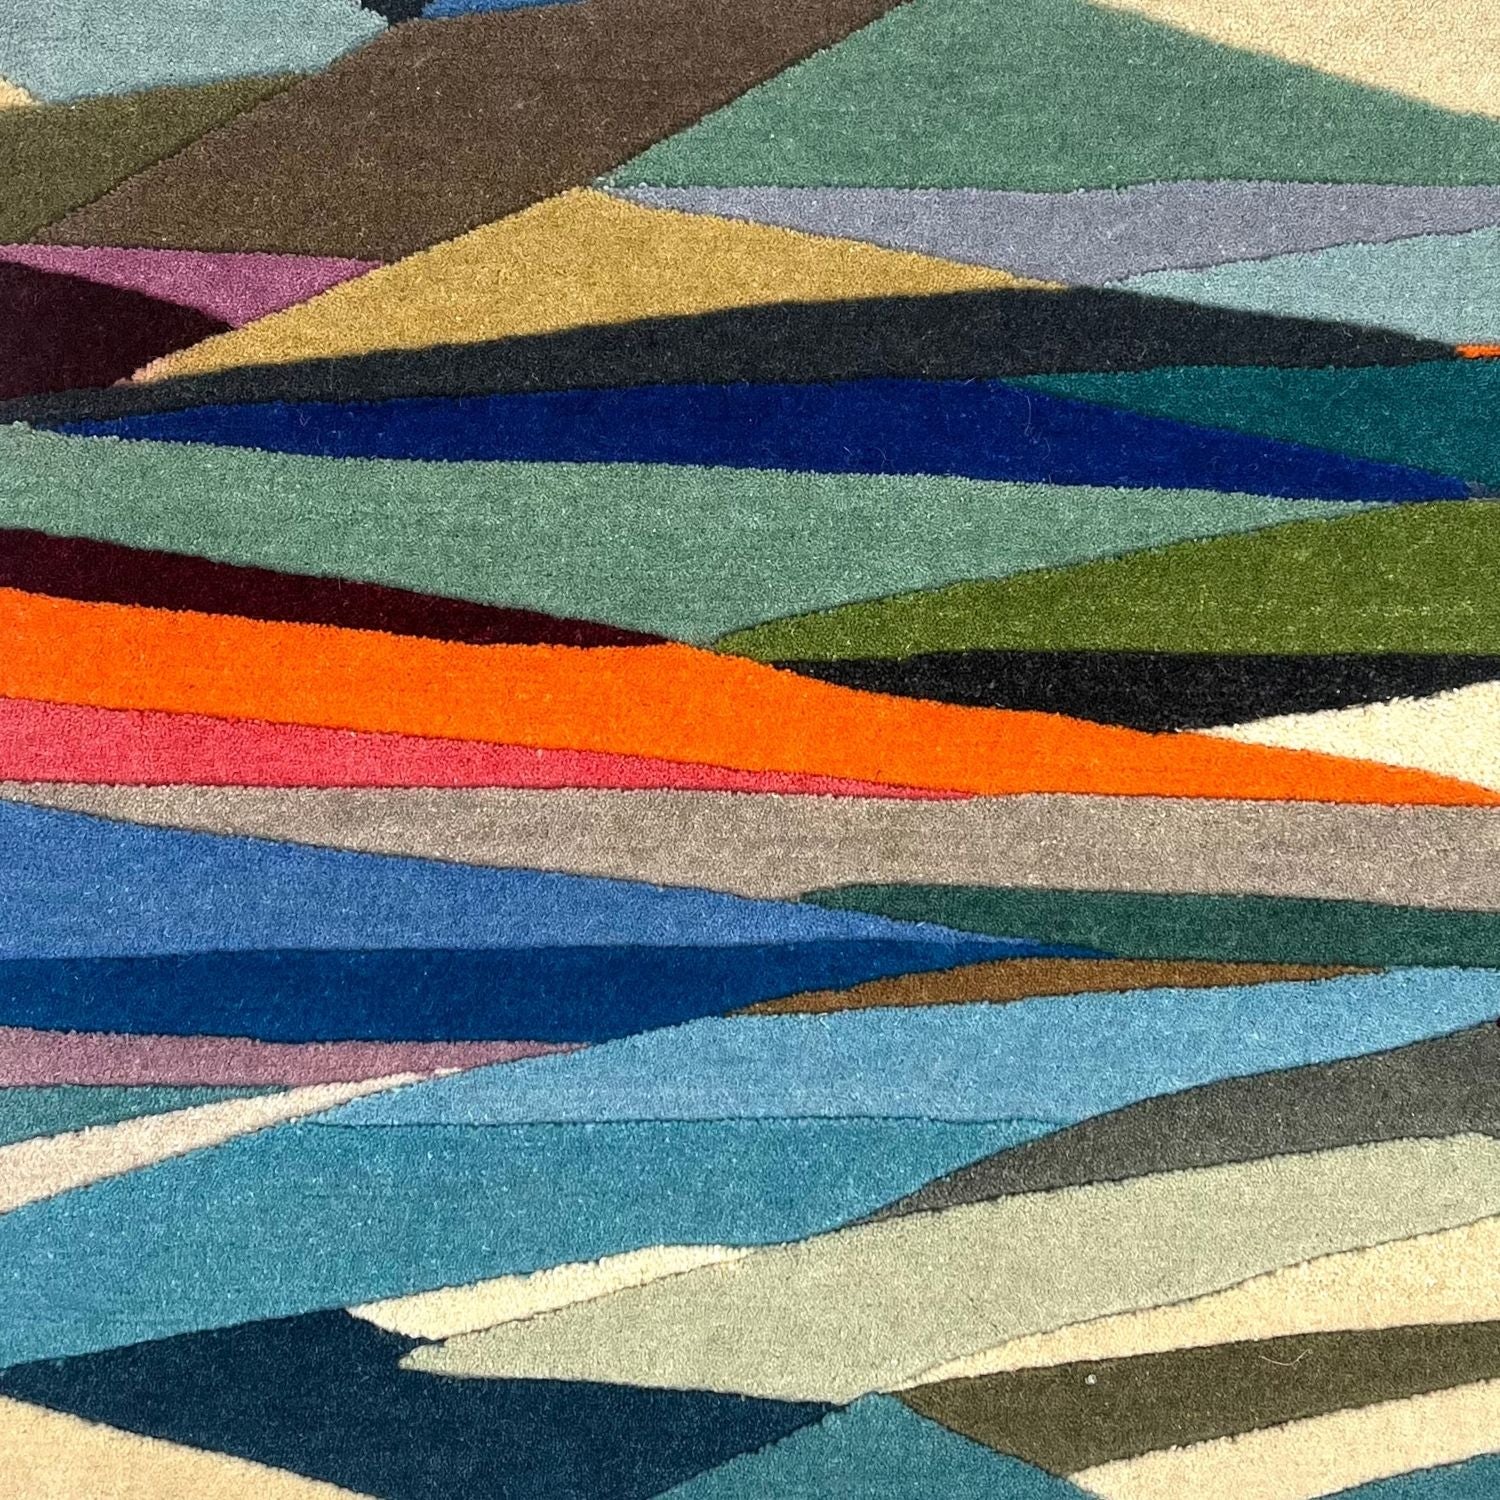 A multi colored rug with organic geometric shapes in many colors.